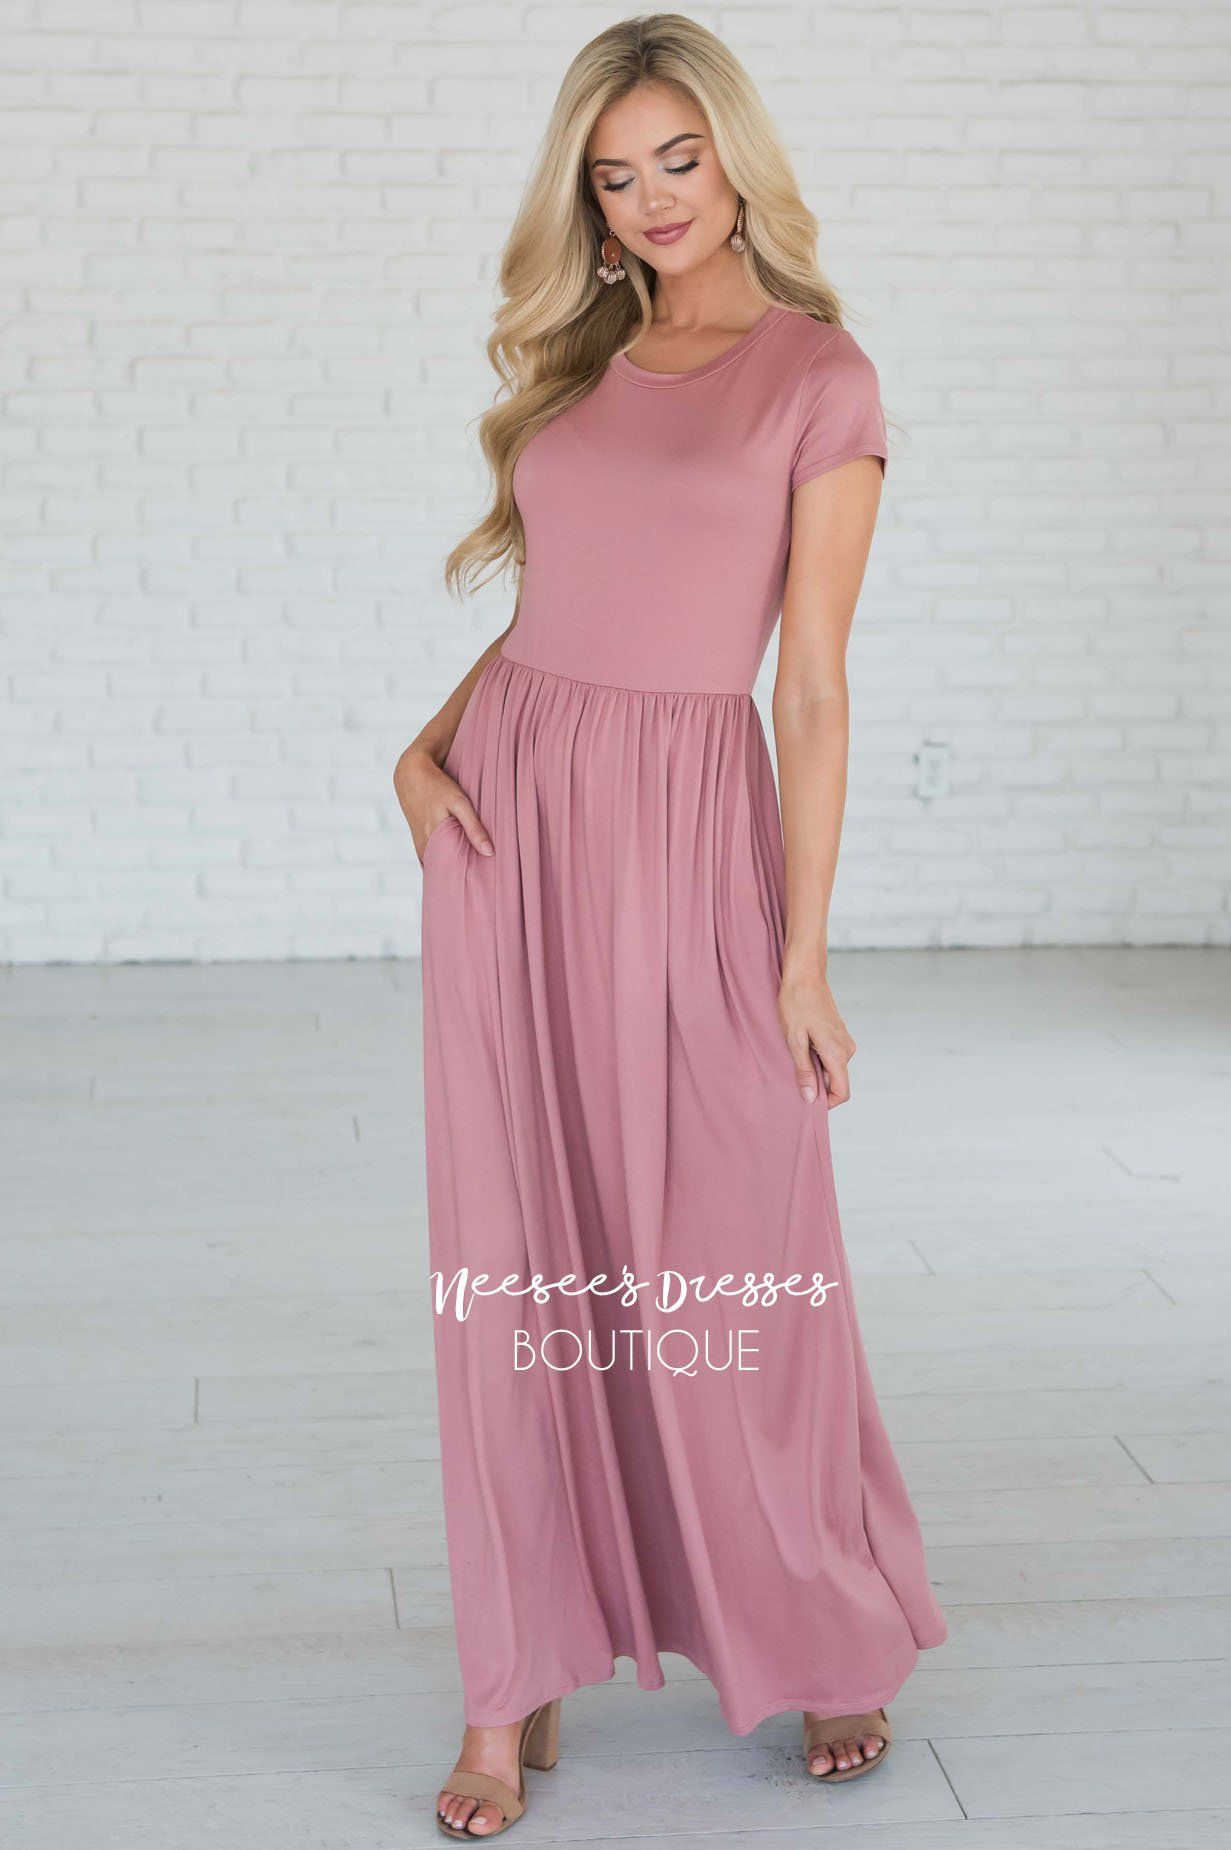 Dusty Rose Modest Dress, Best and Affordable Modest Boutique